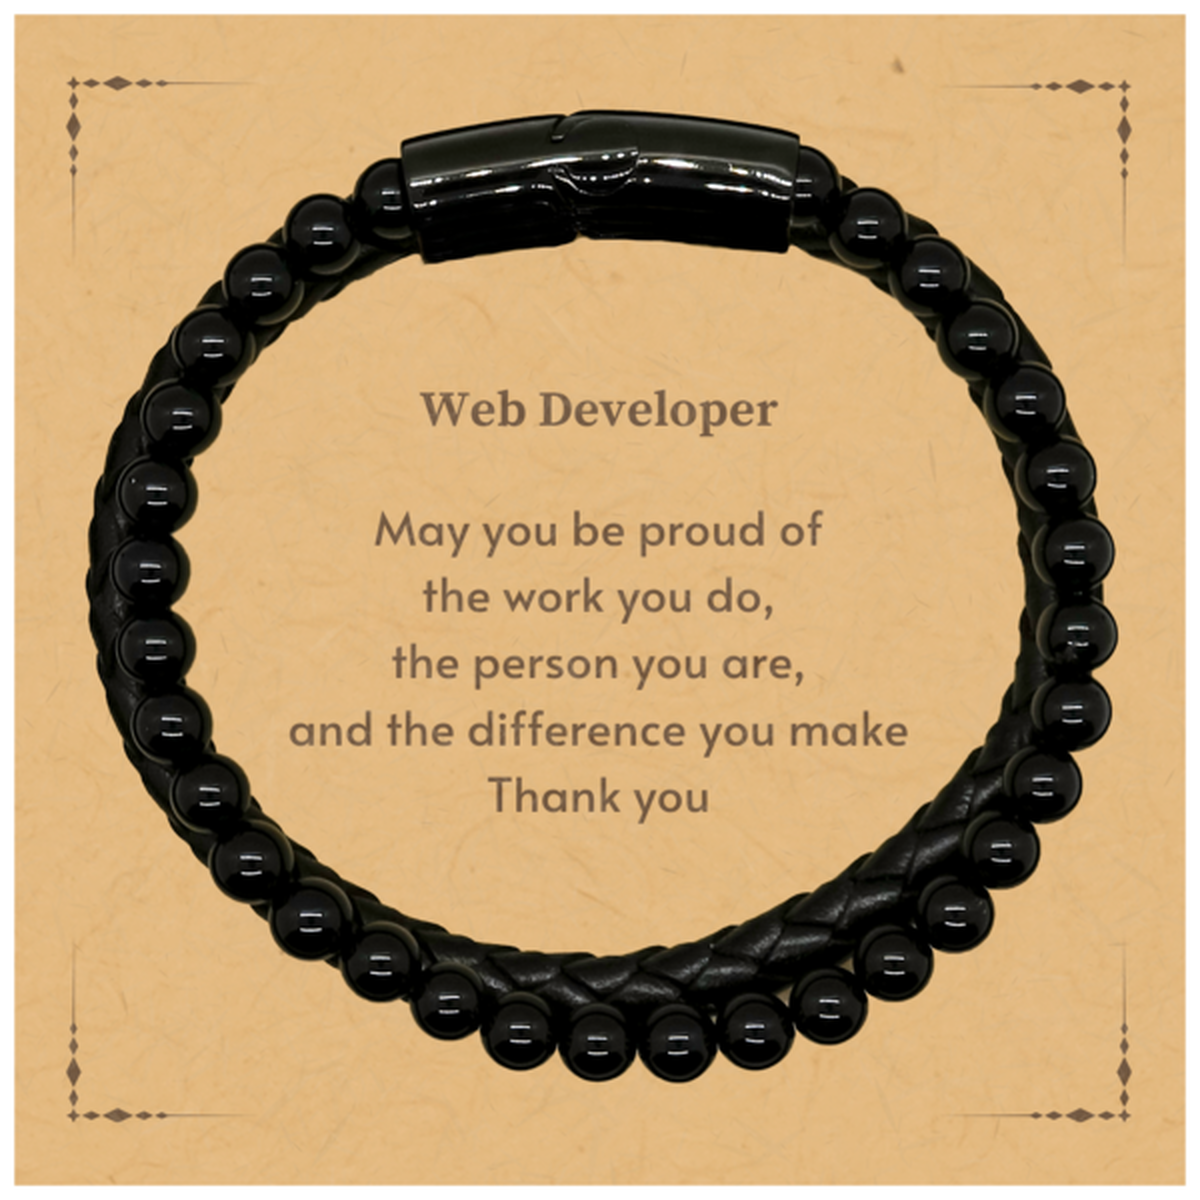 Heartwarming Stone Leather Bracelets Retirement Coworkers Gifts for Web Developer, Web Developer May You be proud of the work you do, the person you are Gifts for Boss Men Women Friends